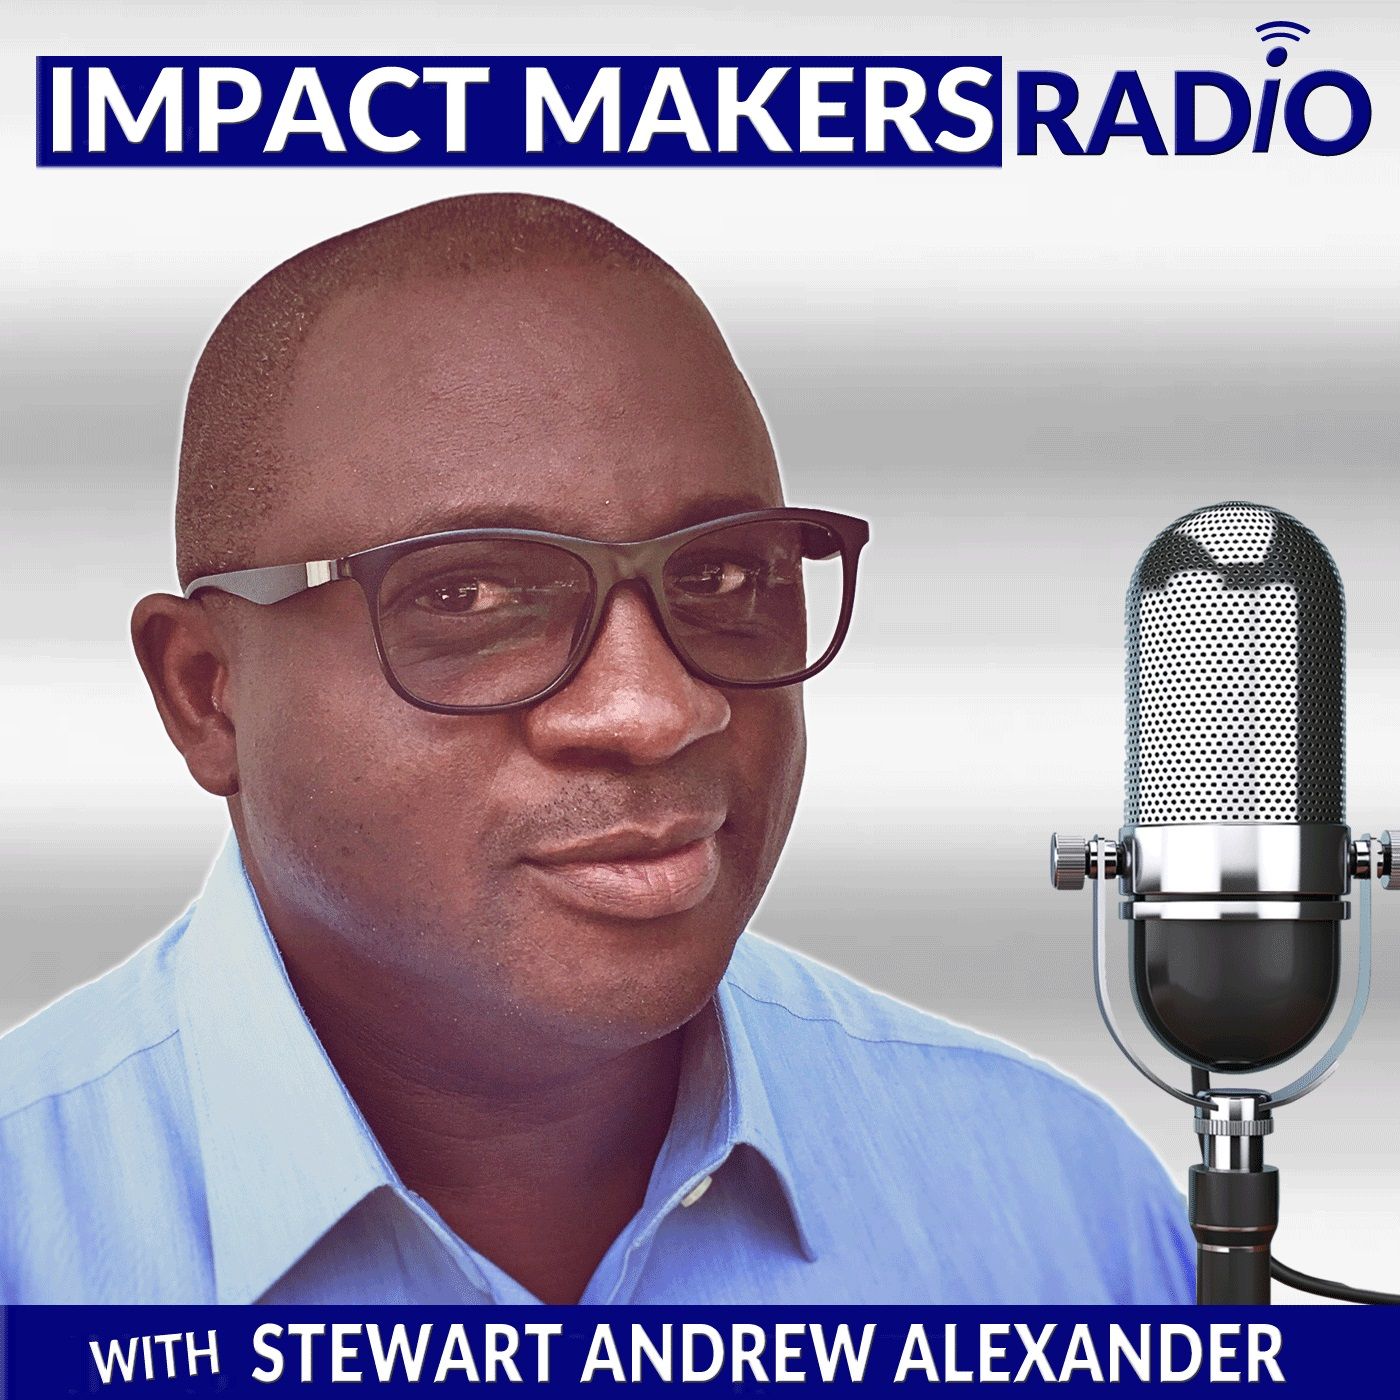 Stewart Andrew Alexander on 18 Years of Verbal Abuse, 12 Years Military Service and How It Affects What He Does Today